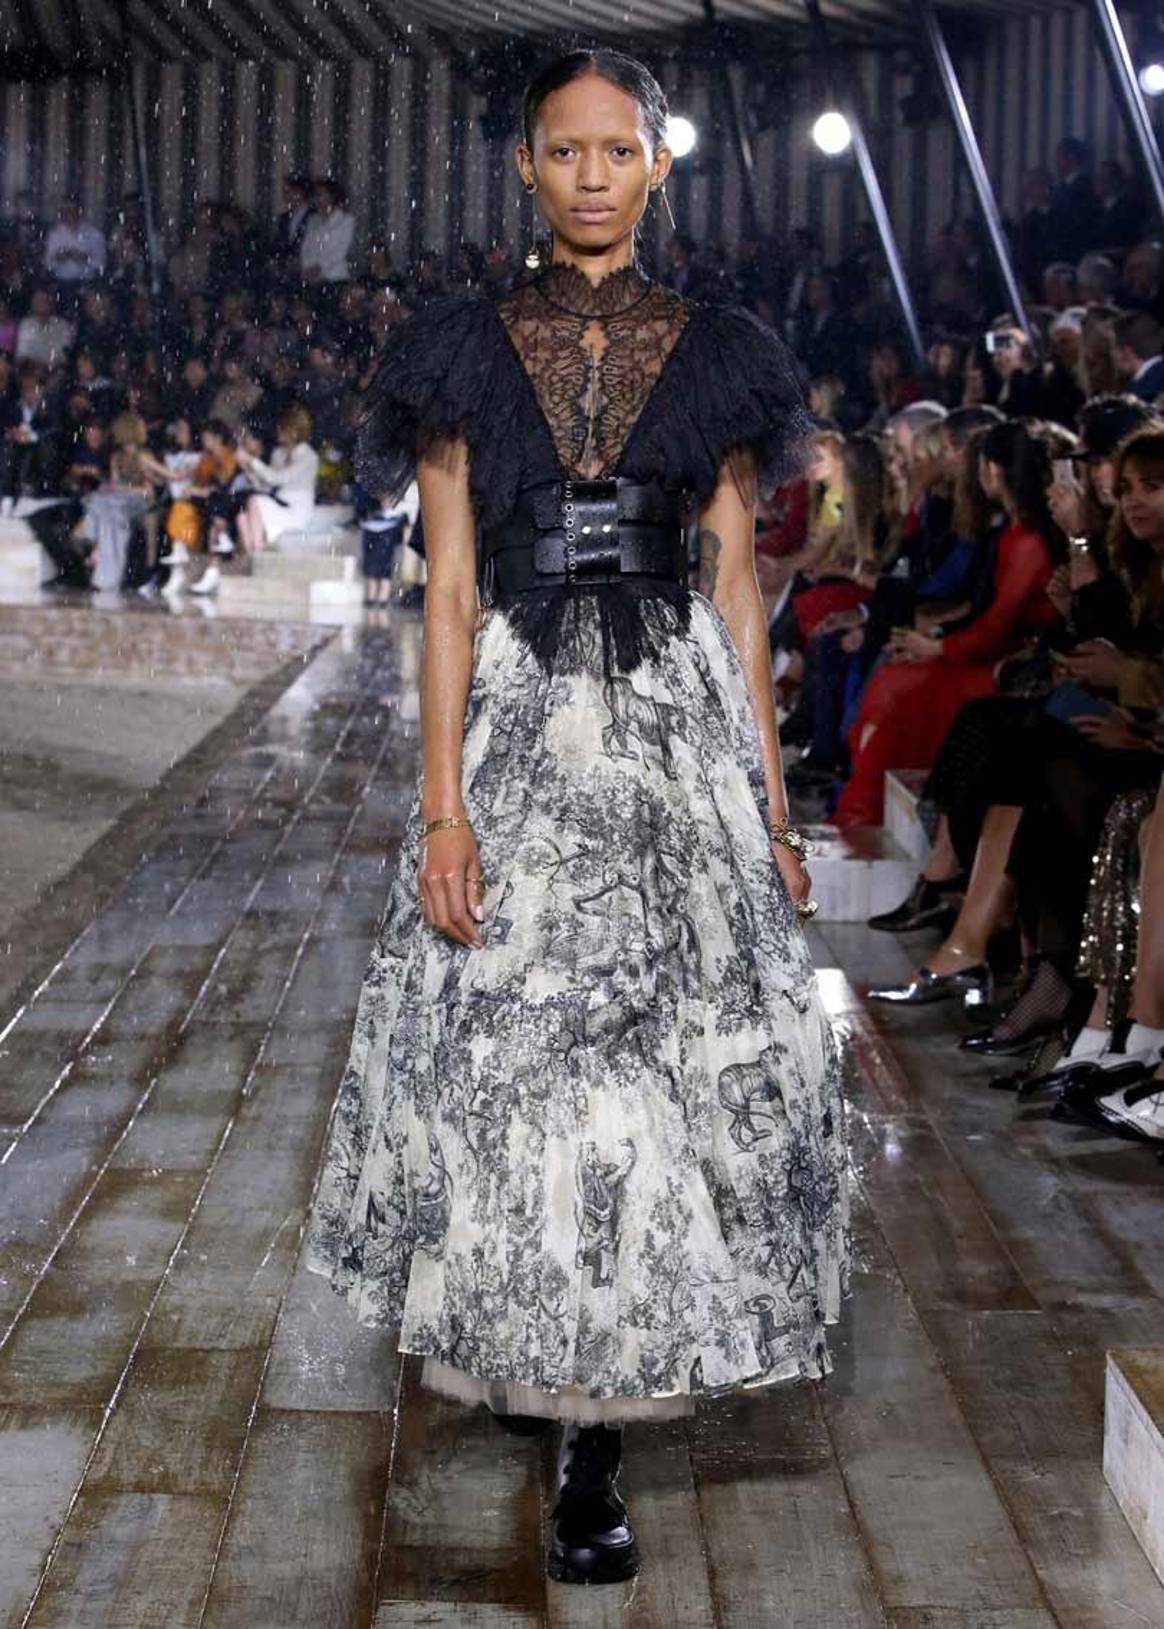 In Pictures: Dior Cruise Collection 2019